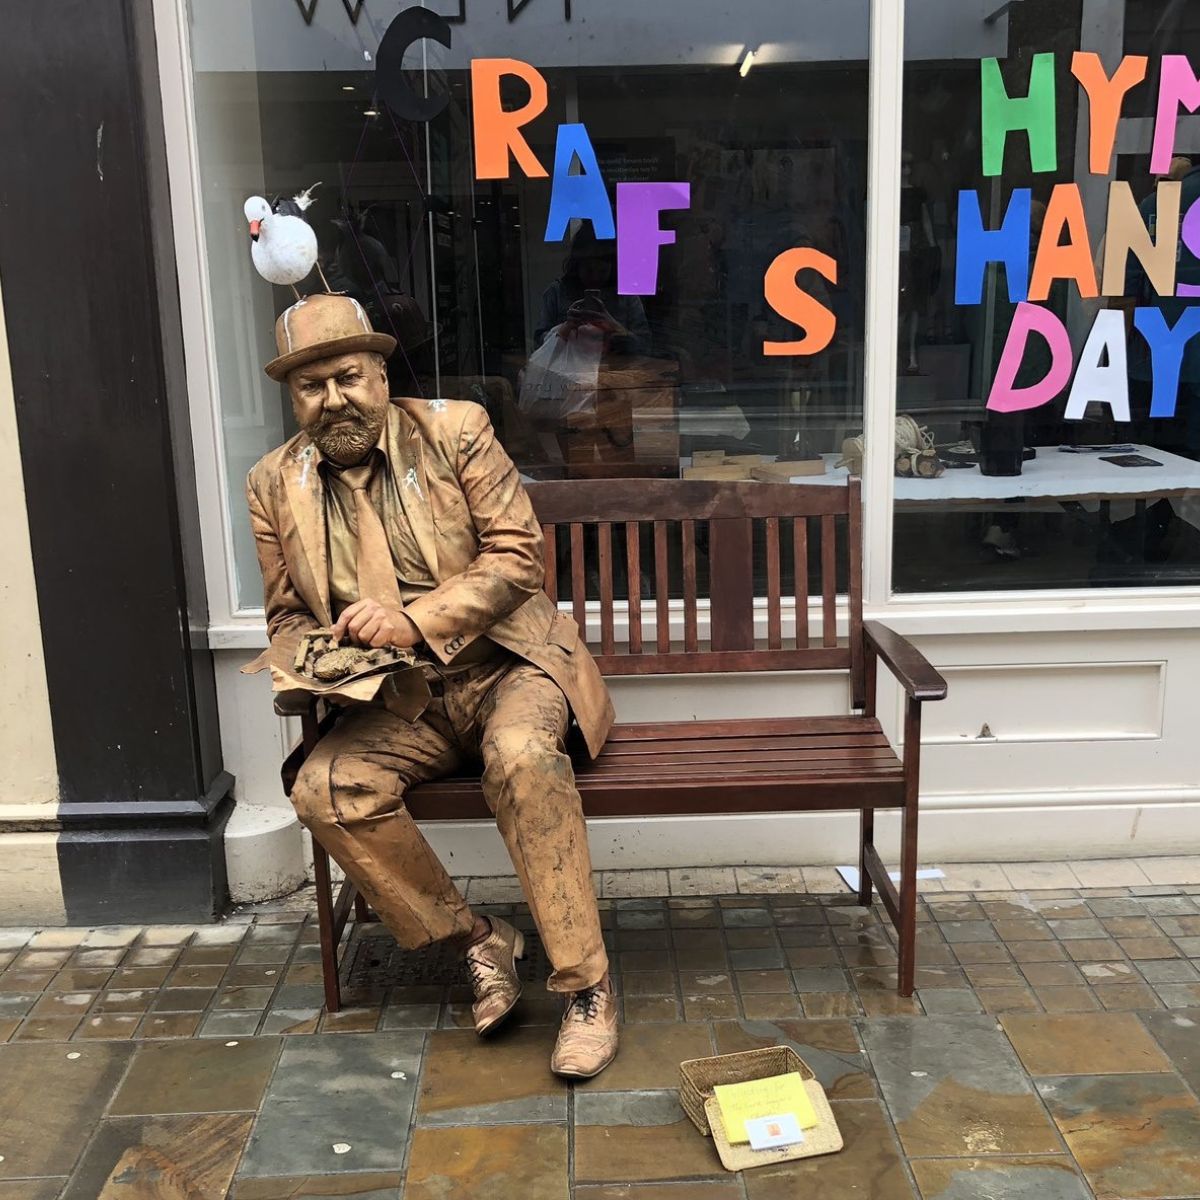 Hull's well known Gold Man human statue entertains the crowd at Hanse day